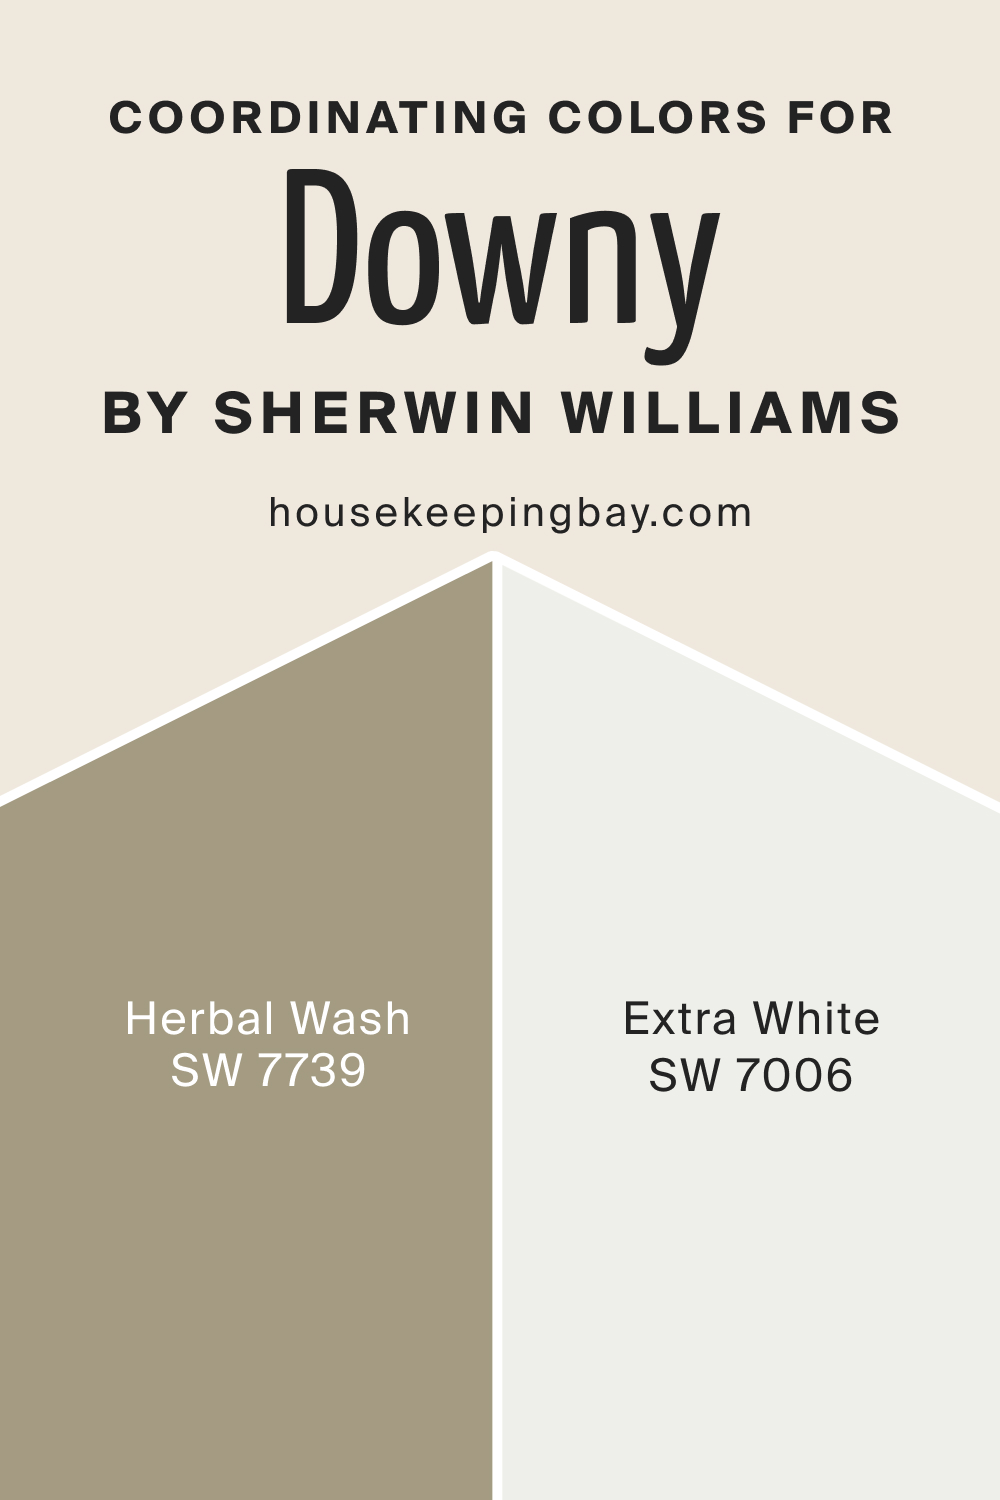 Coordinating Colors for SW Downy by Sherwin Williams